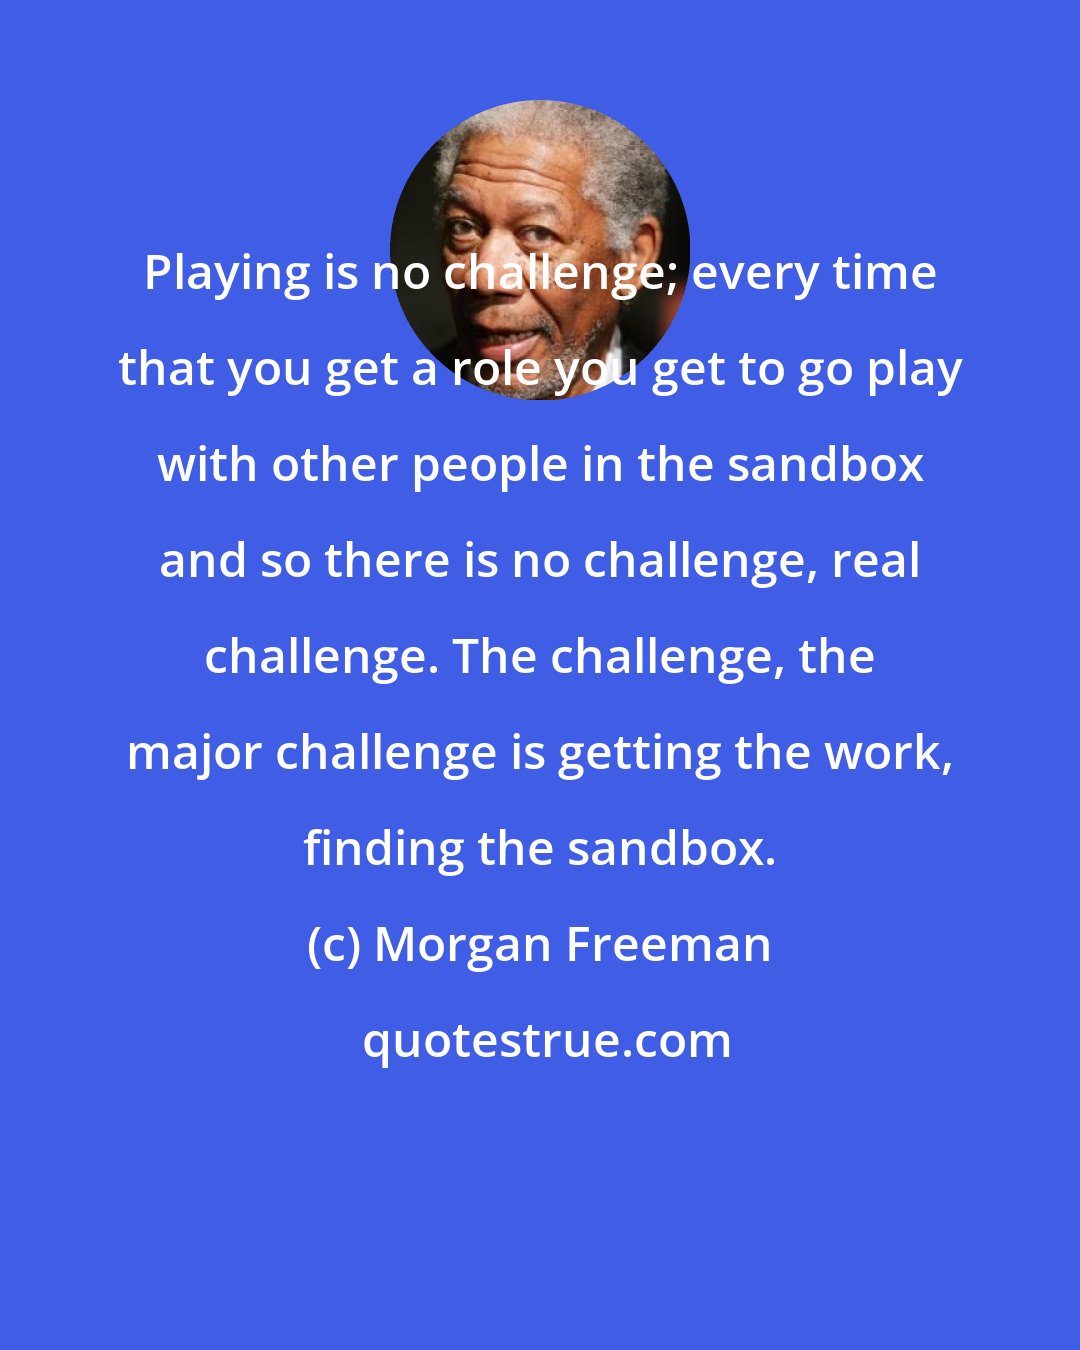 Morgan Freeman: Playing is no challenge; every time that you get a role you get to go play with other people in the sandbox and so there is no challenge, real challenge. The challenge, the major challenge is getting the work, finding the sandbox.